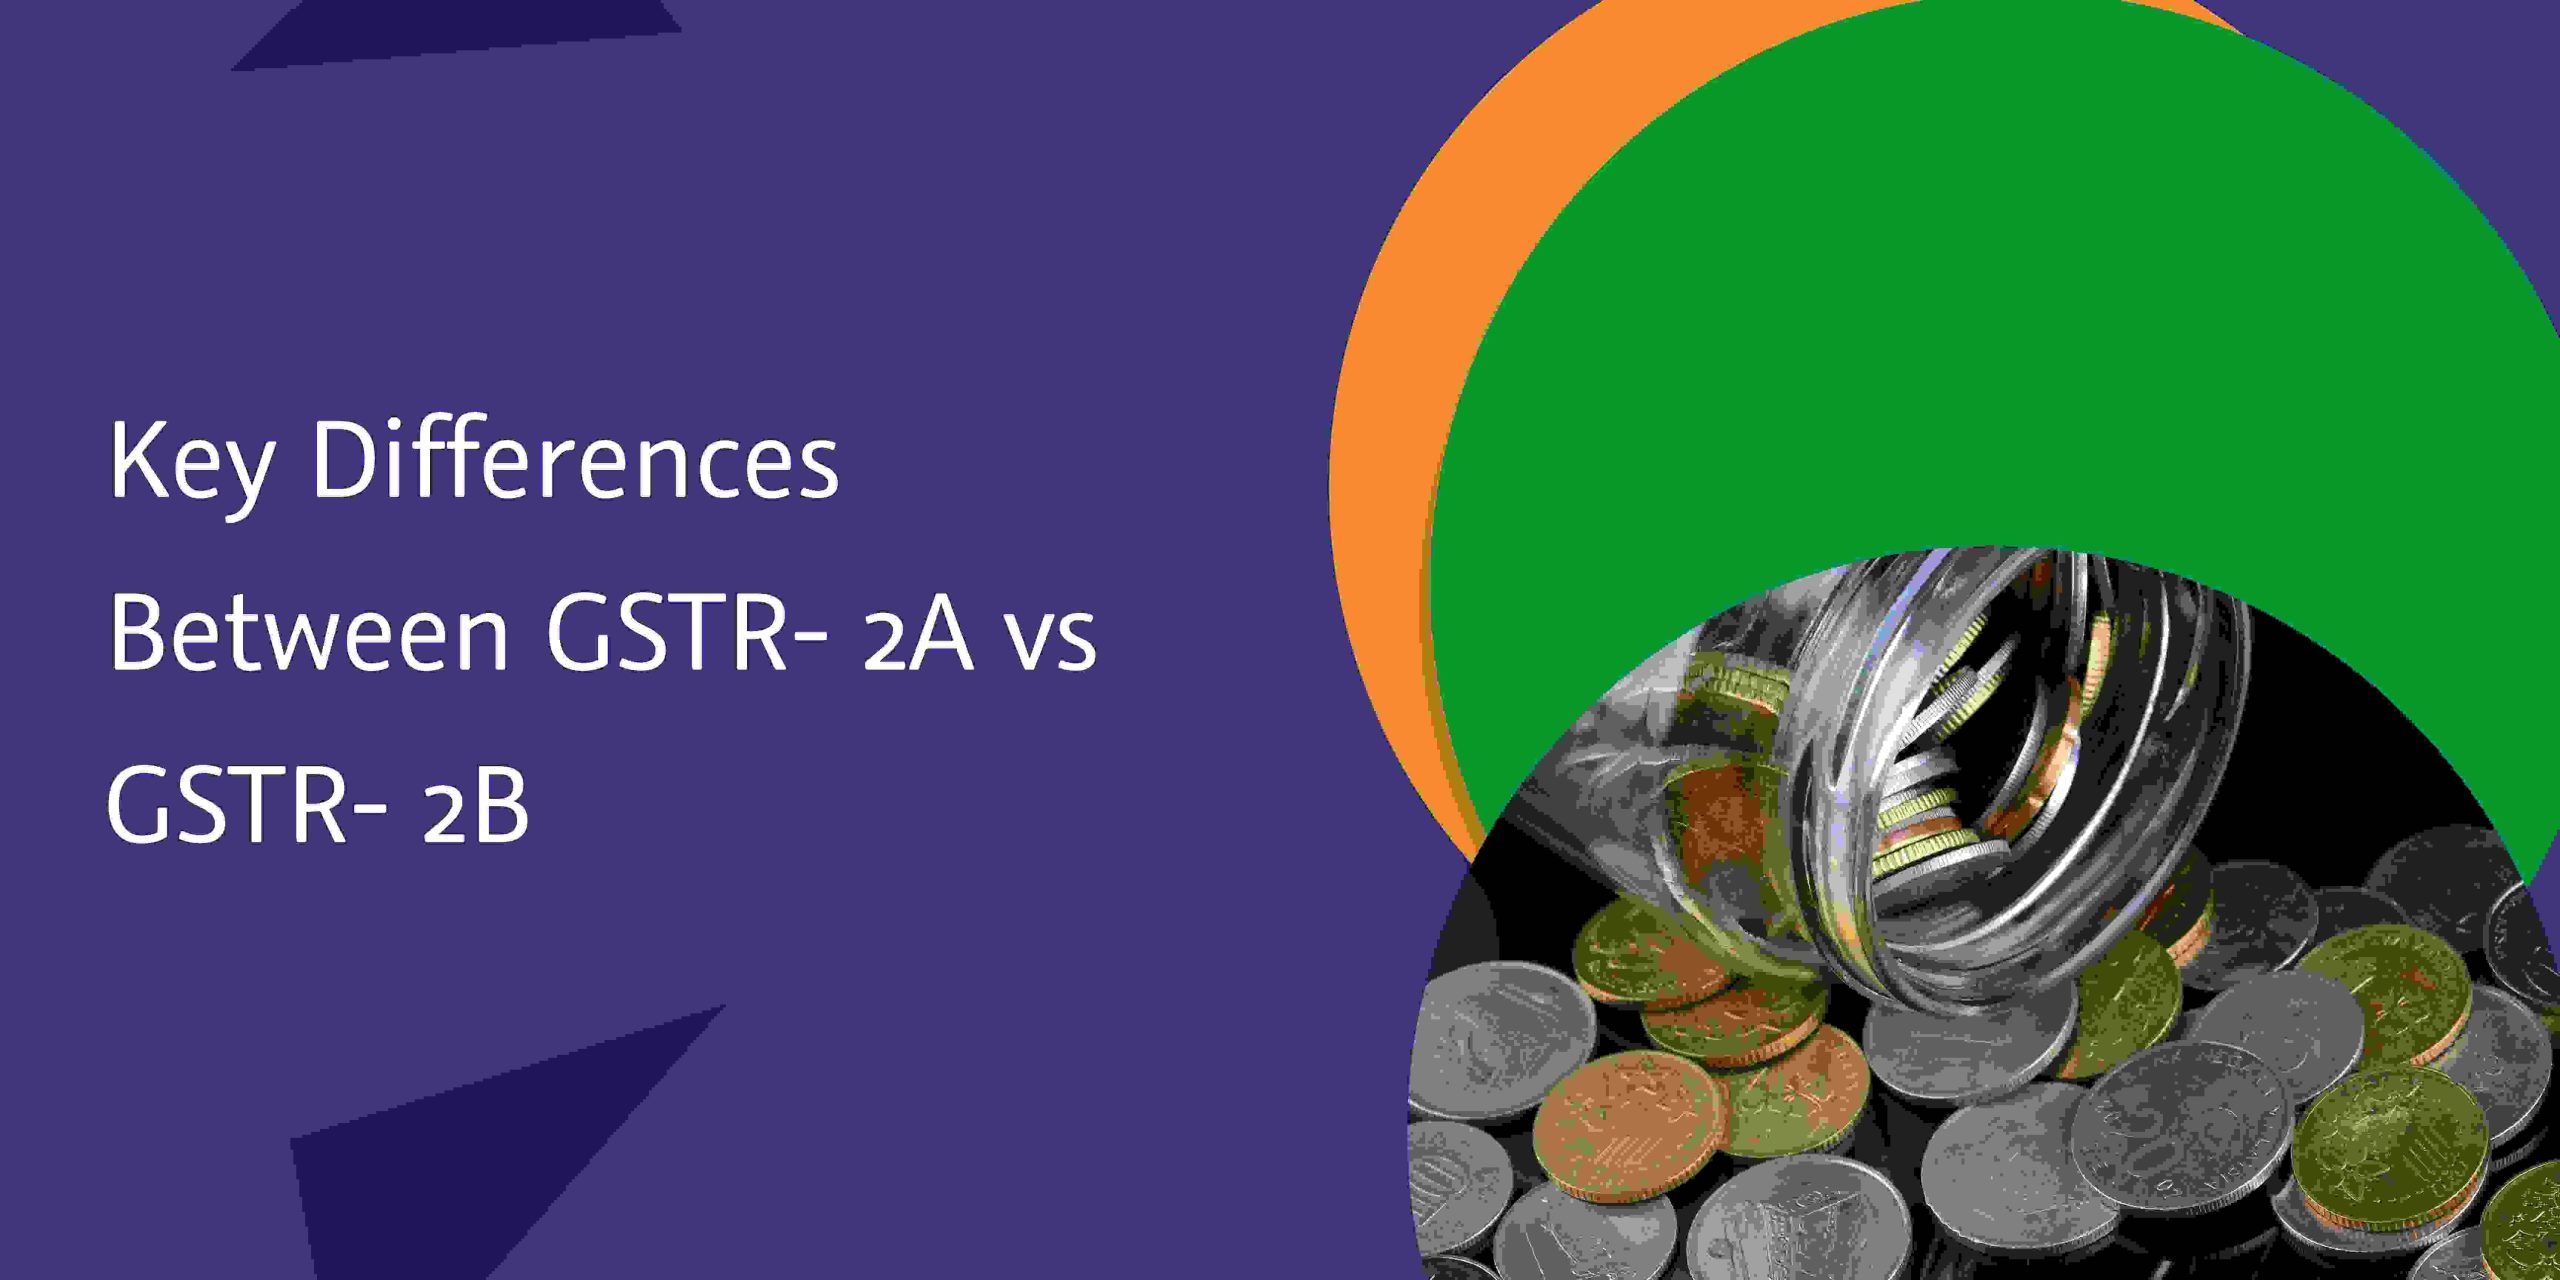 You are currently viewing Key Differences Between GSTR- 2A vs GSTR- 2B